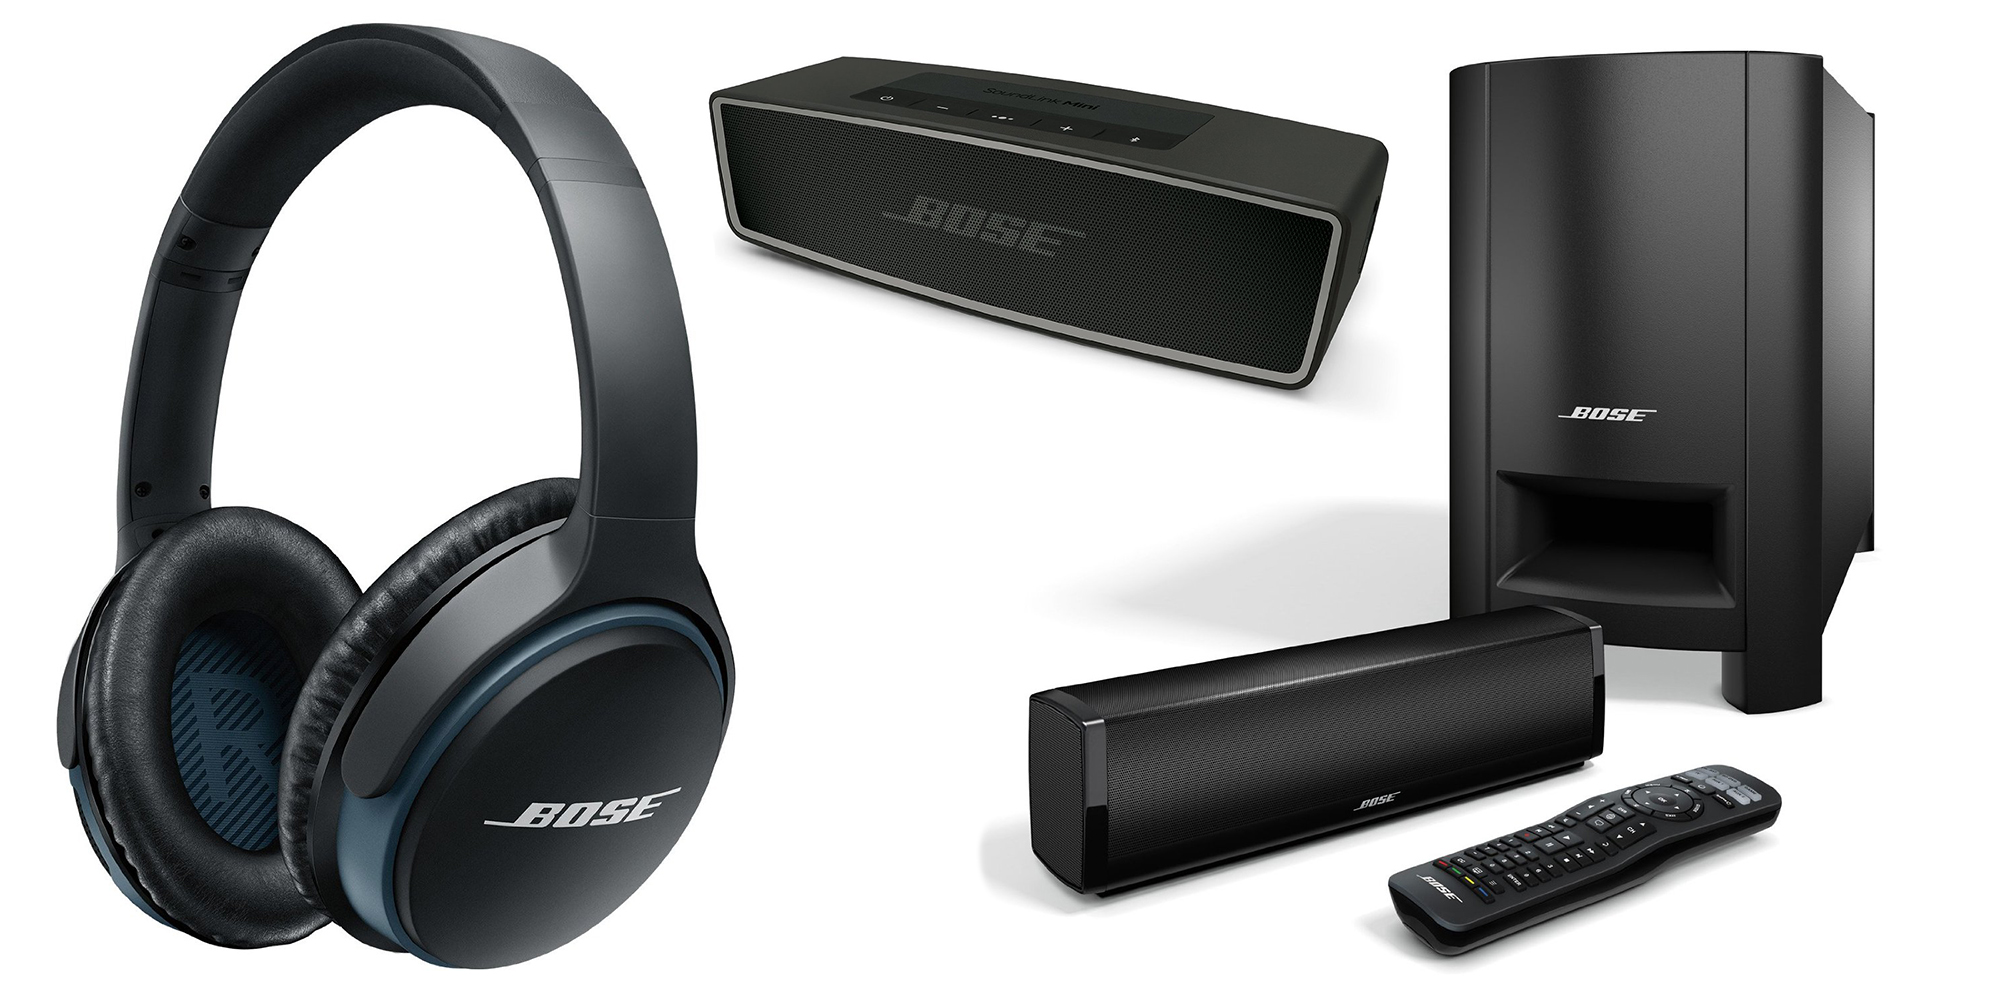 Bose early Black Friday deals: SoundLink Around-Ear Wireless Headphones - What Is Bose Black Friday Deals